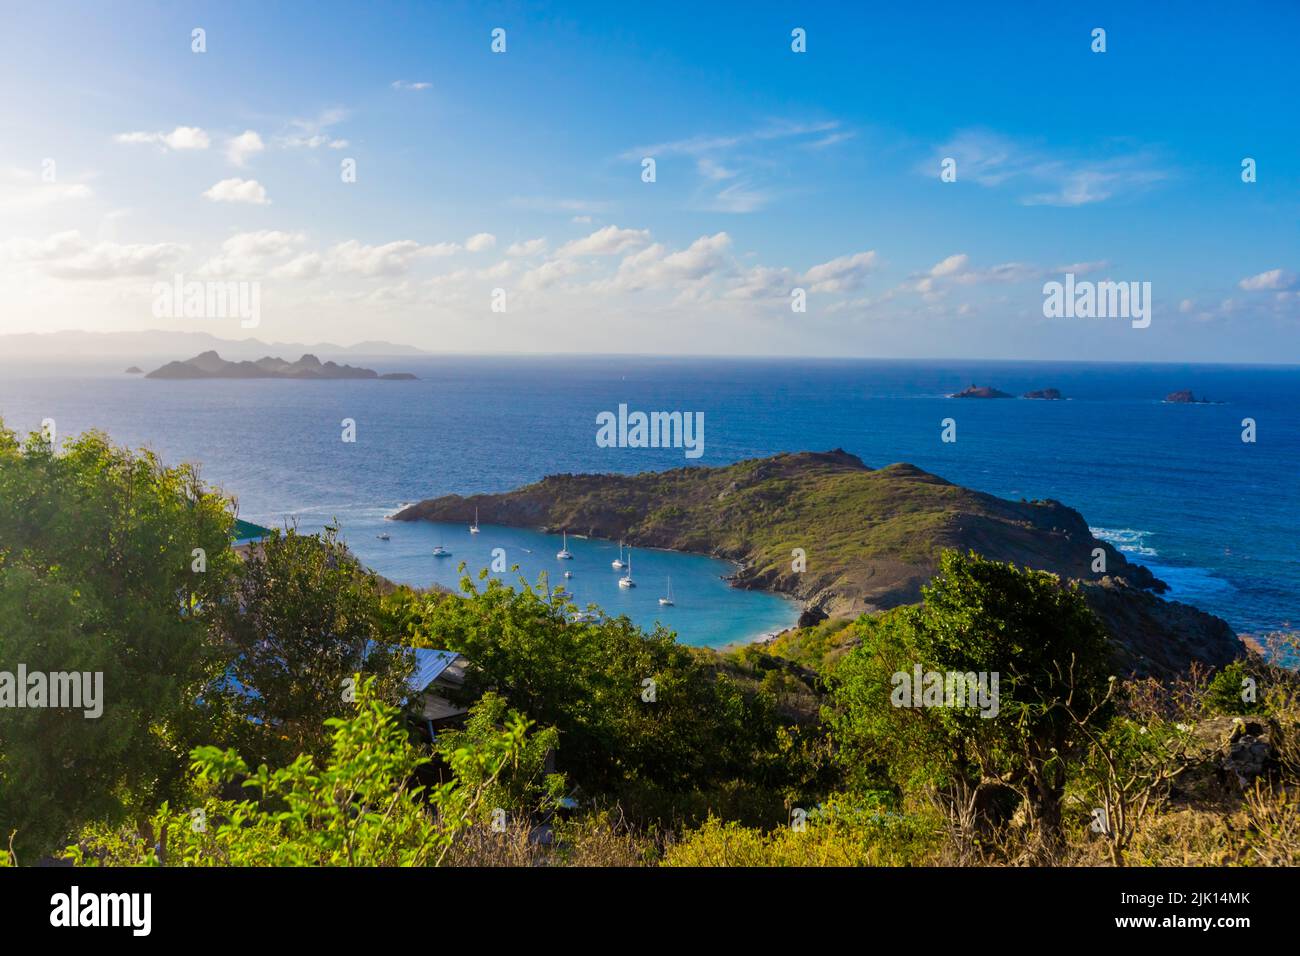 Hilltop view of Eastern Caribbean Sea and edges of St. Barths island, Saint Barthelemy, Caribbean, Central America Stock Photo